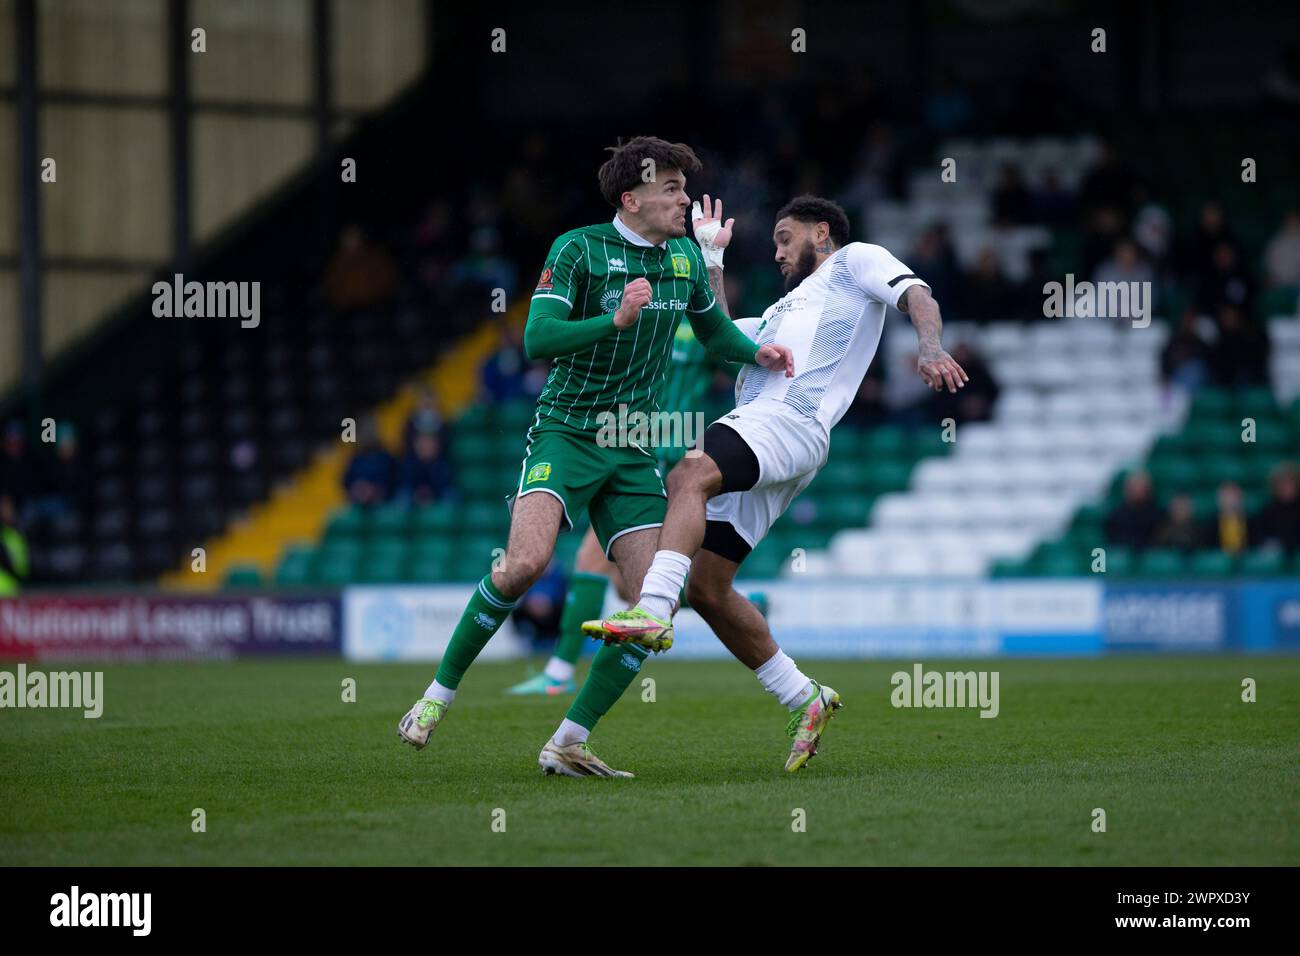 Jay Foulston of Yeovil Town  and Crossley Lema/ during the National League South  match at  Huish Park Stadium, Yeovil Picture by Martin Edwards/ 078 Stock Photo